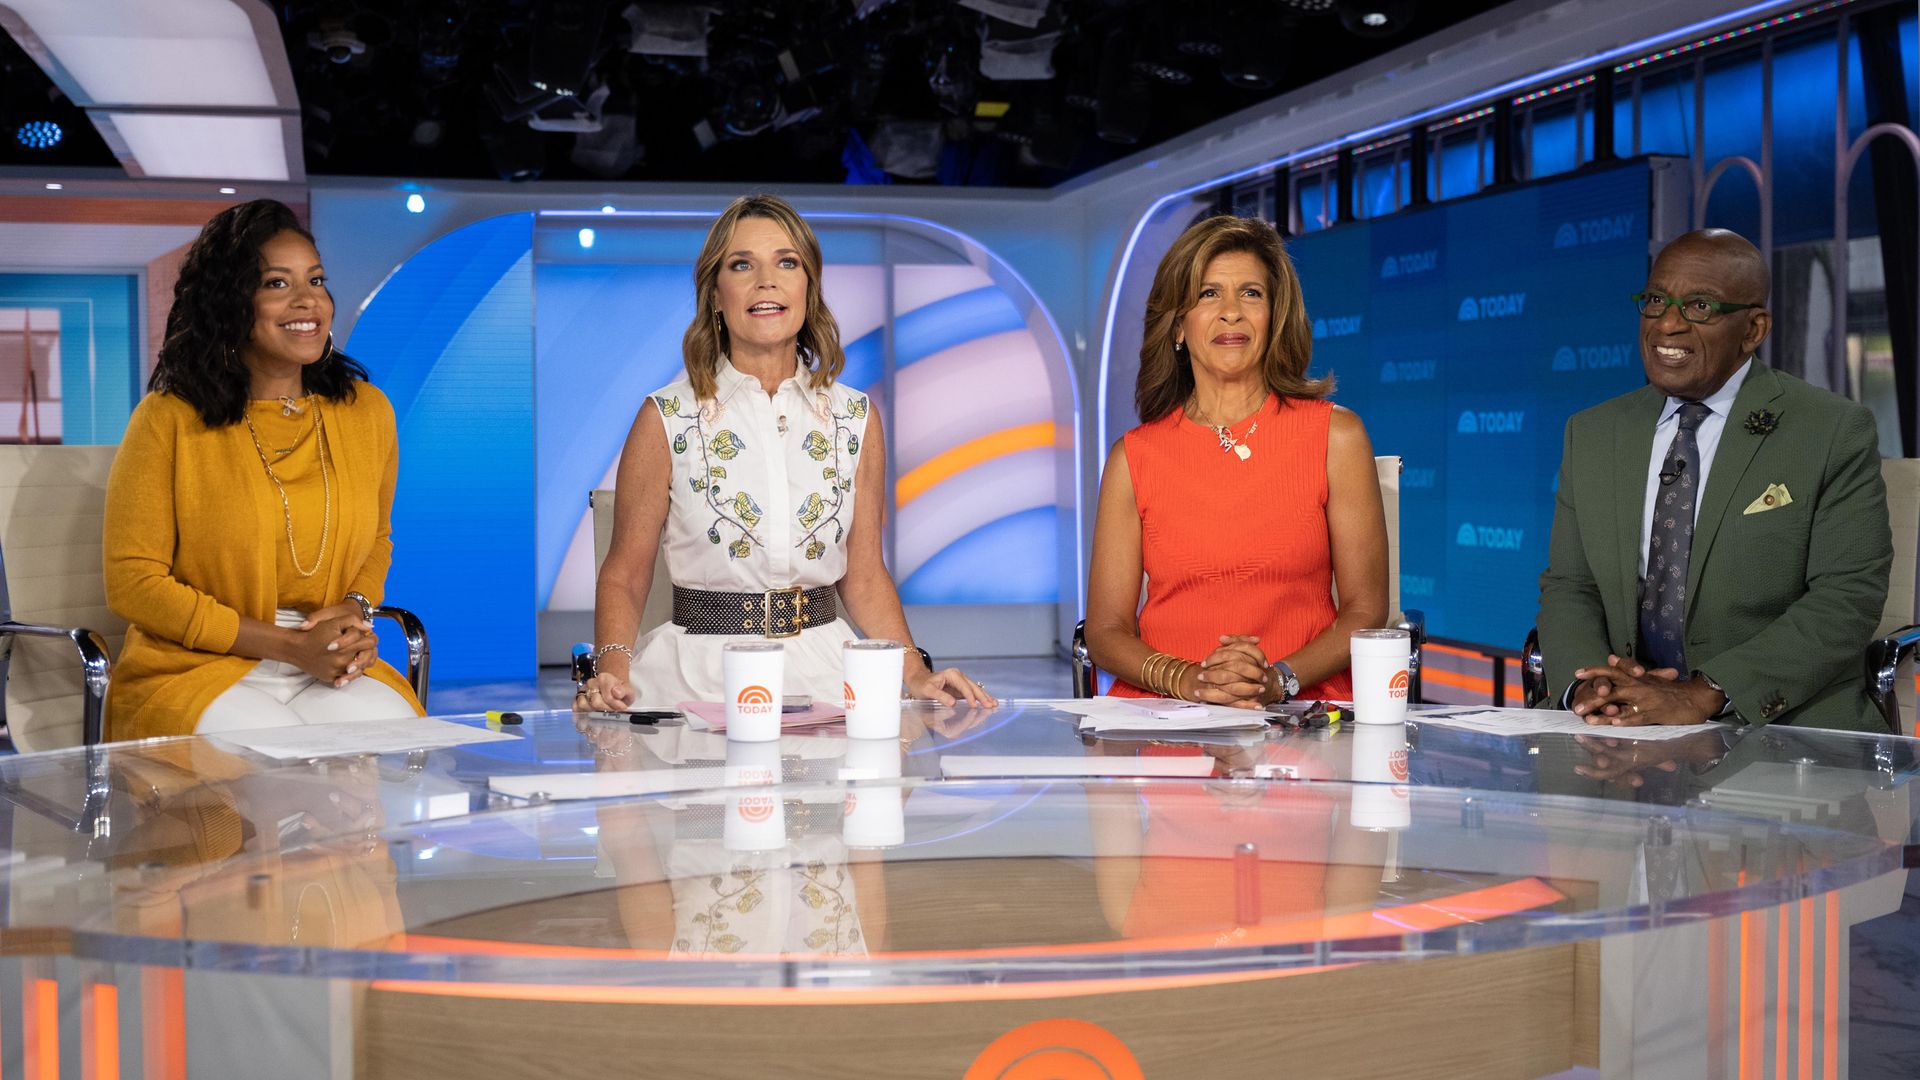 Today's Savannah Guthrie with her co-stars